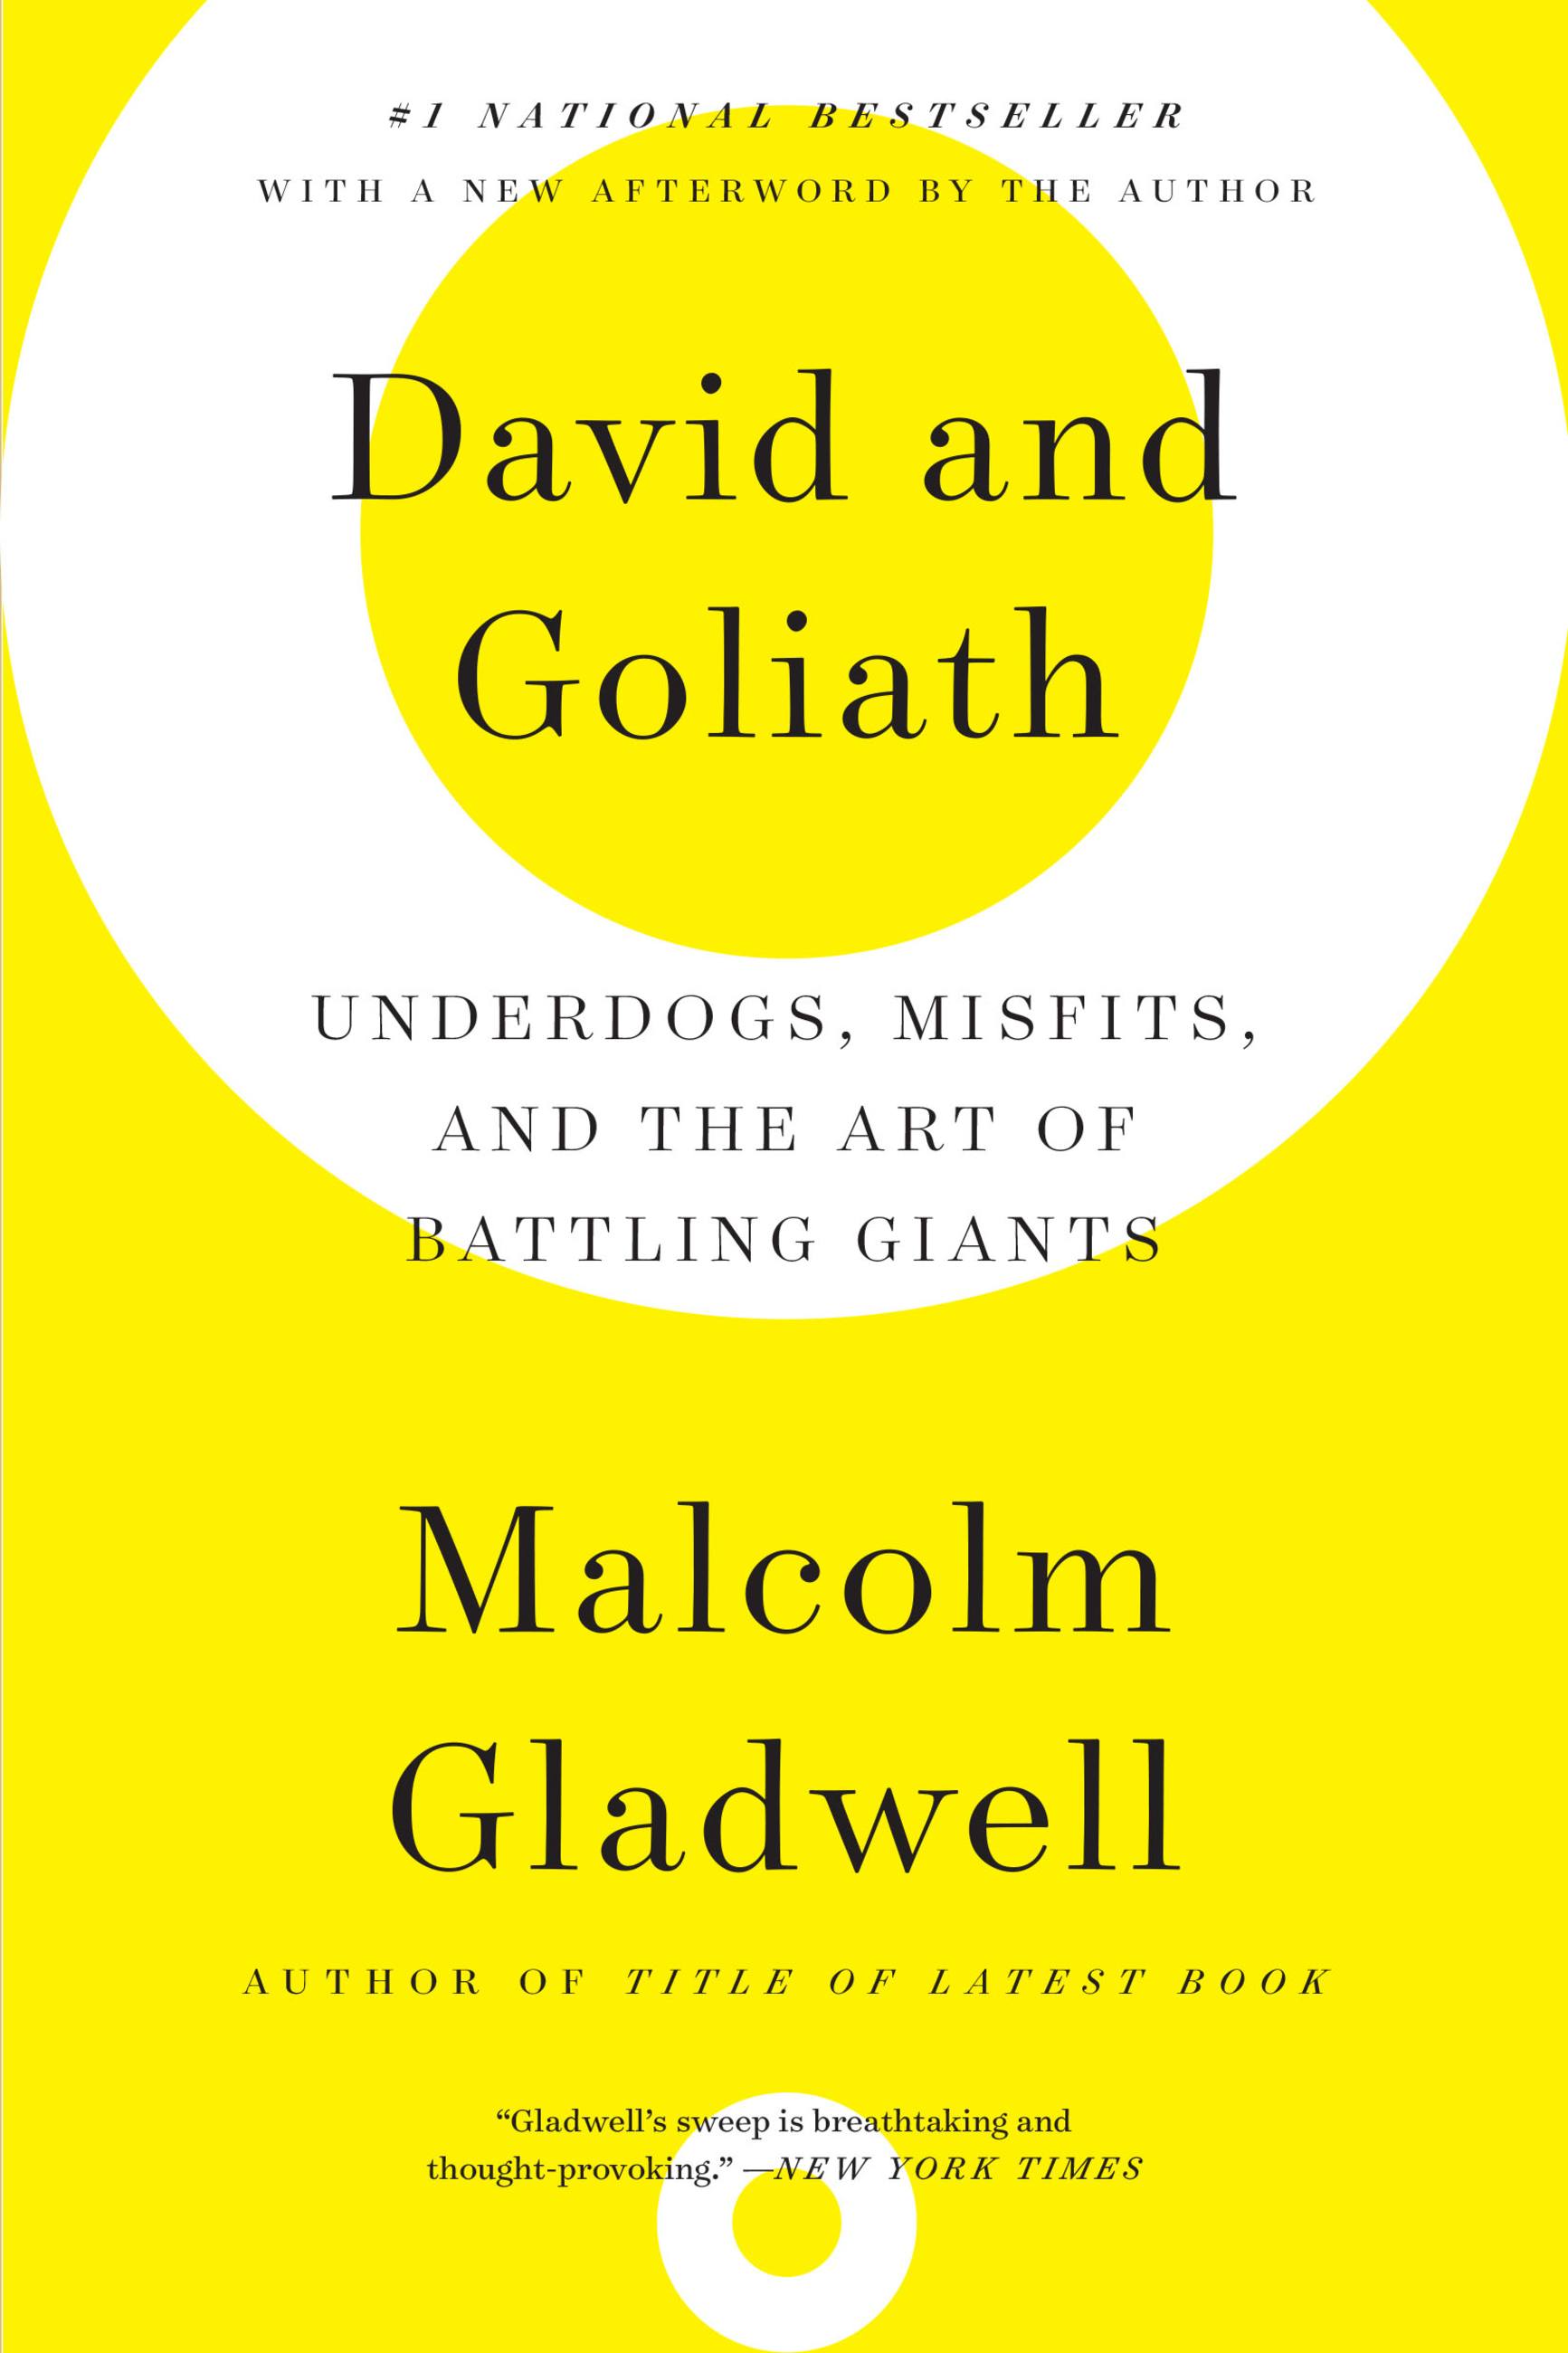 david and goliath malcolm gladwell sparknotes